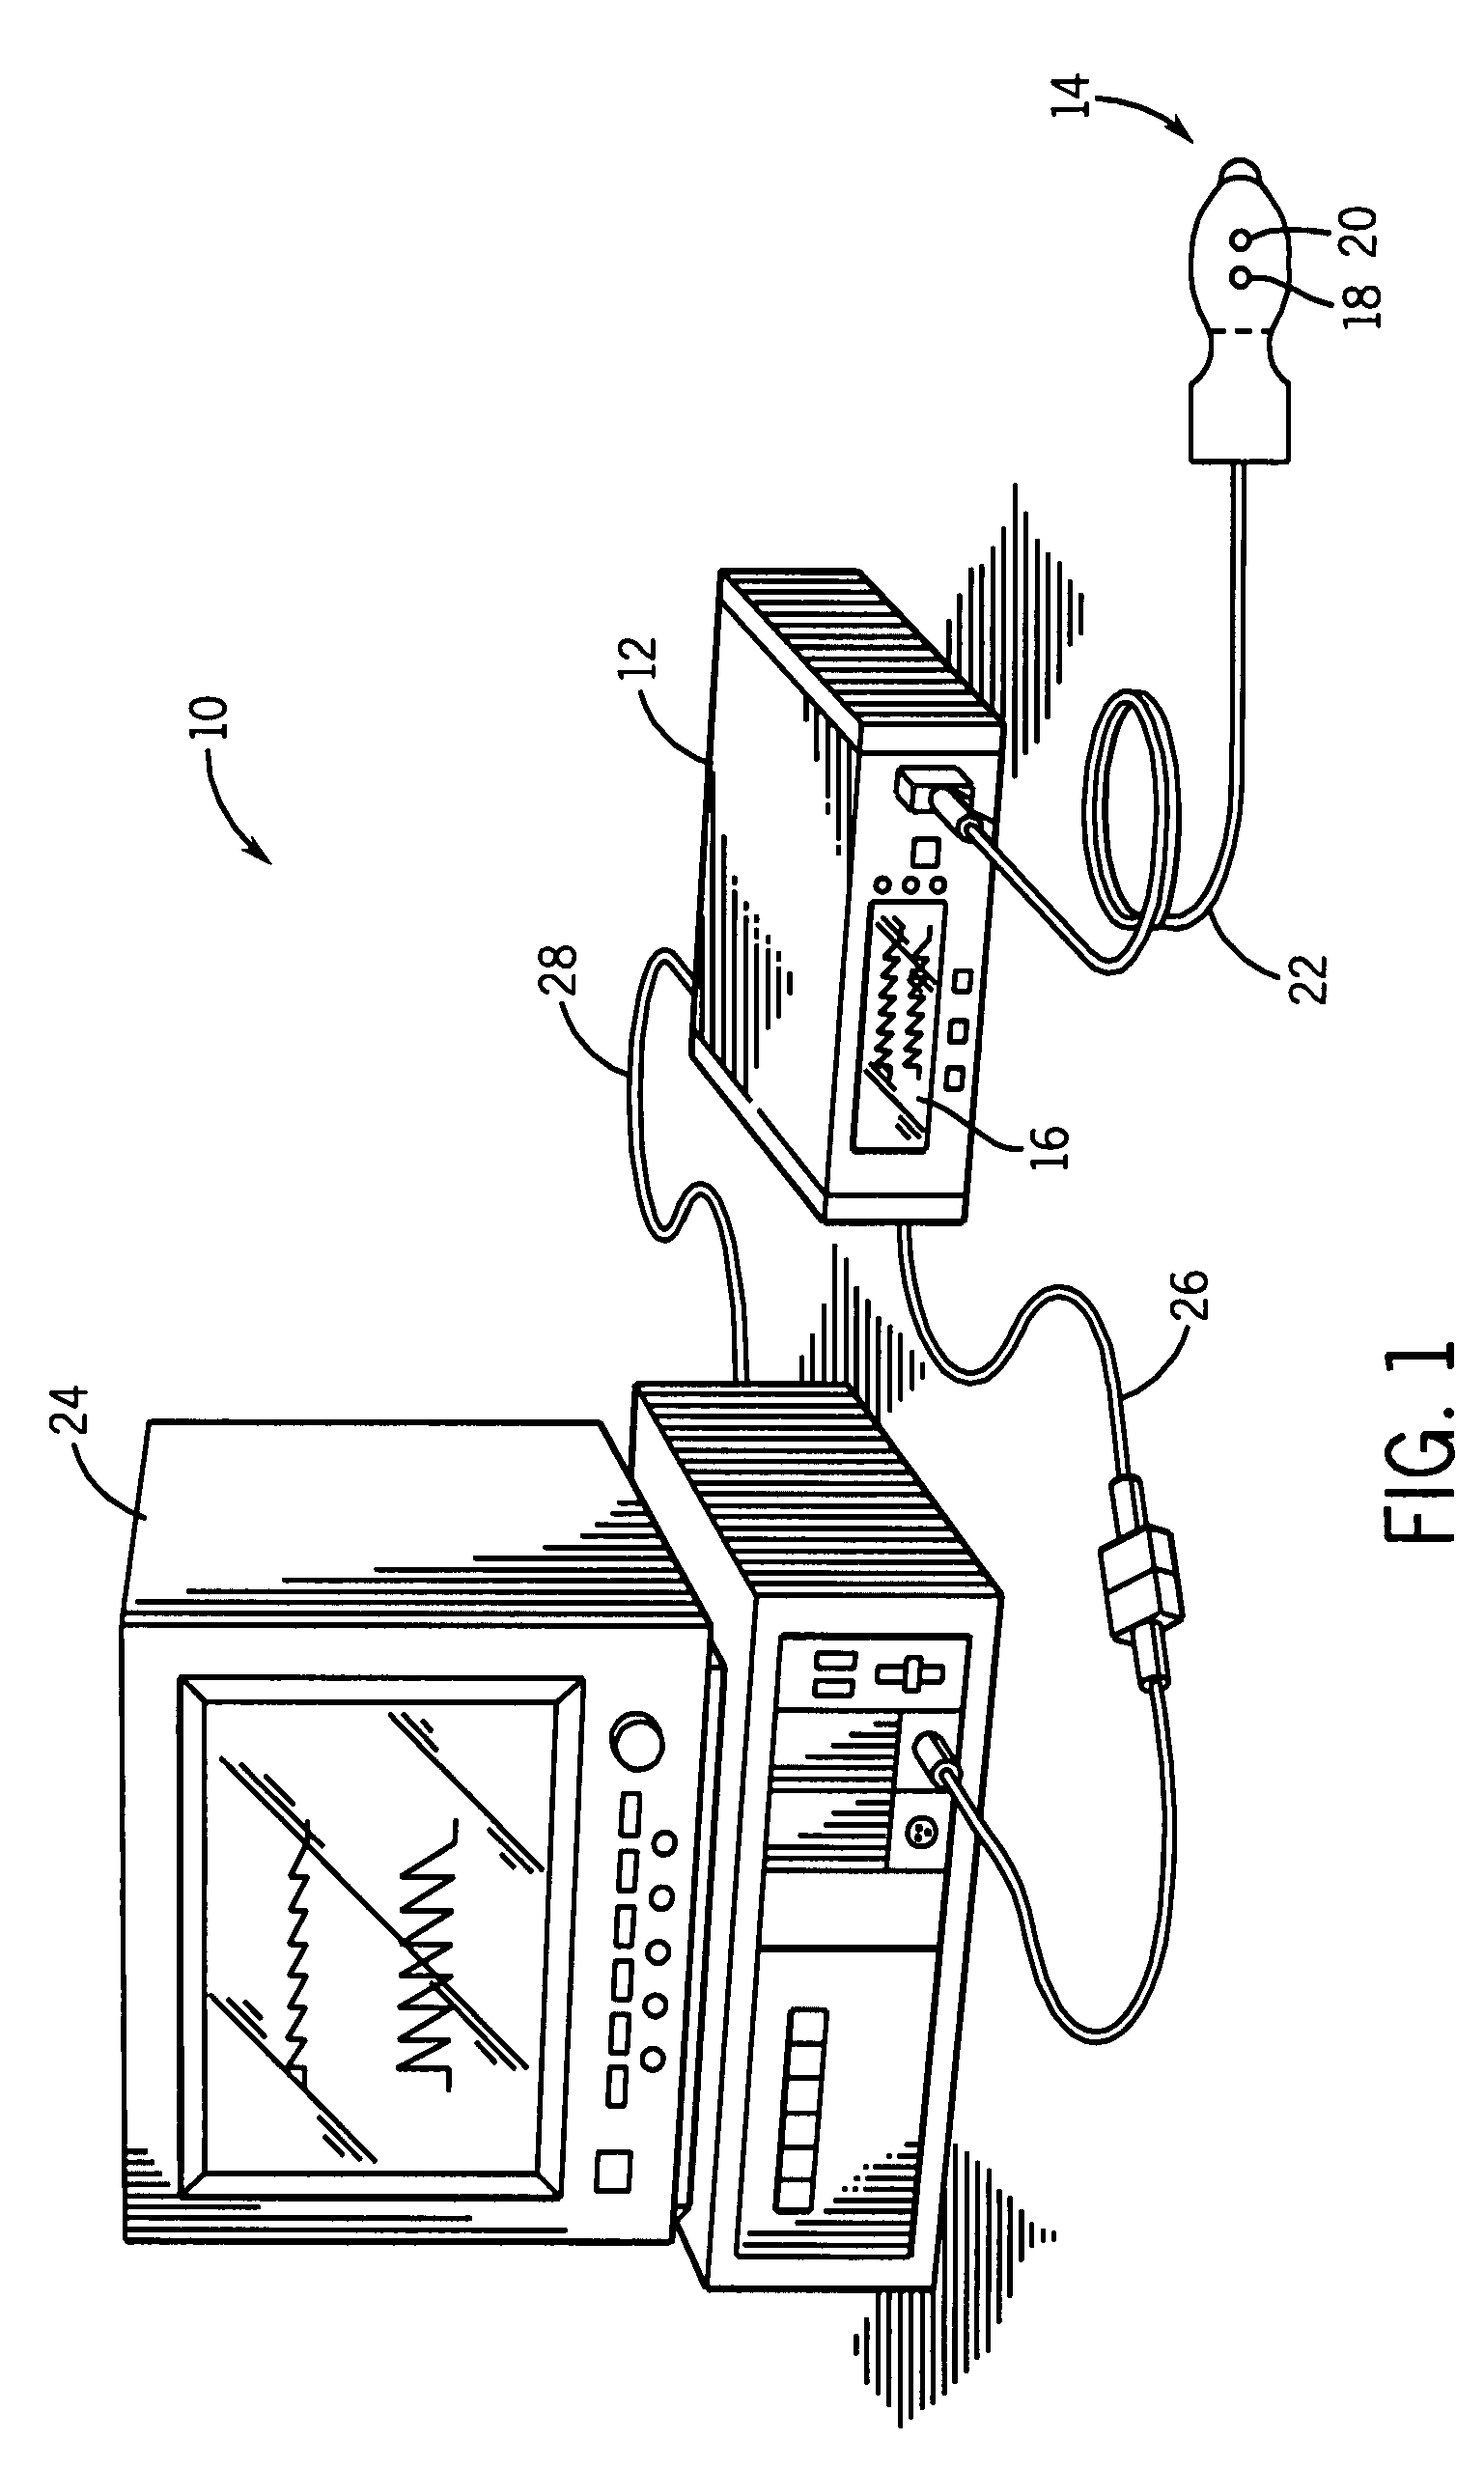 System and method for venous pulsation detection using near infrared wavelengths